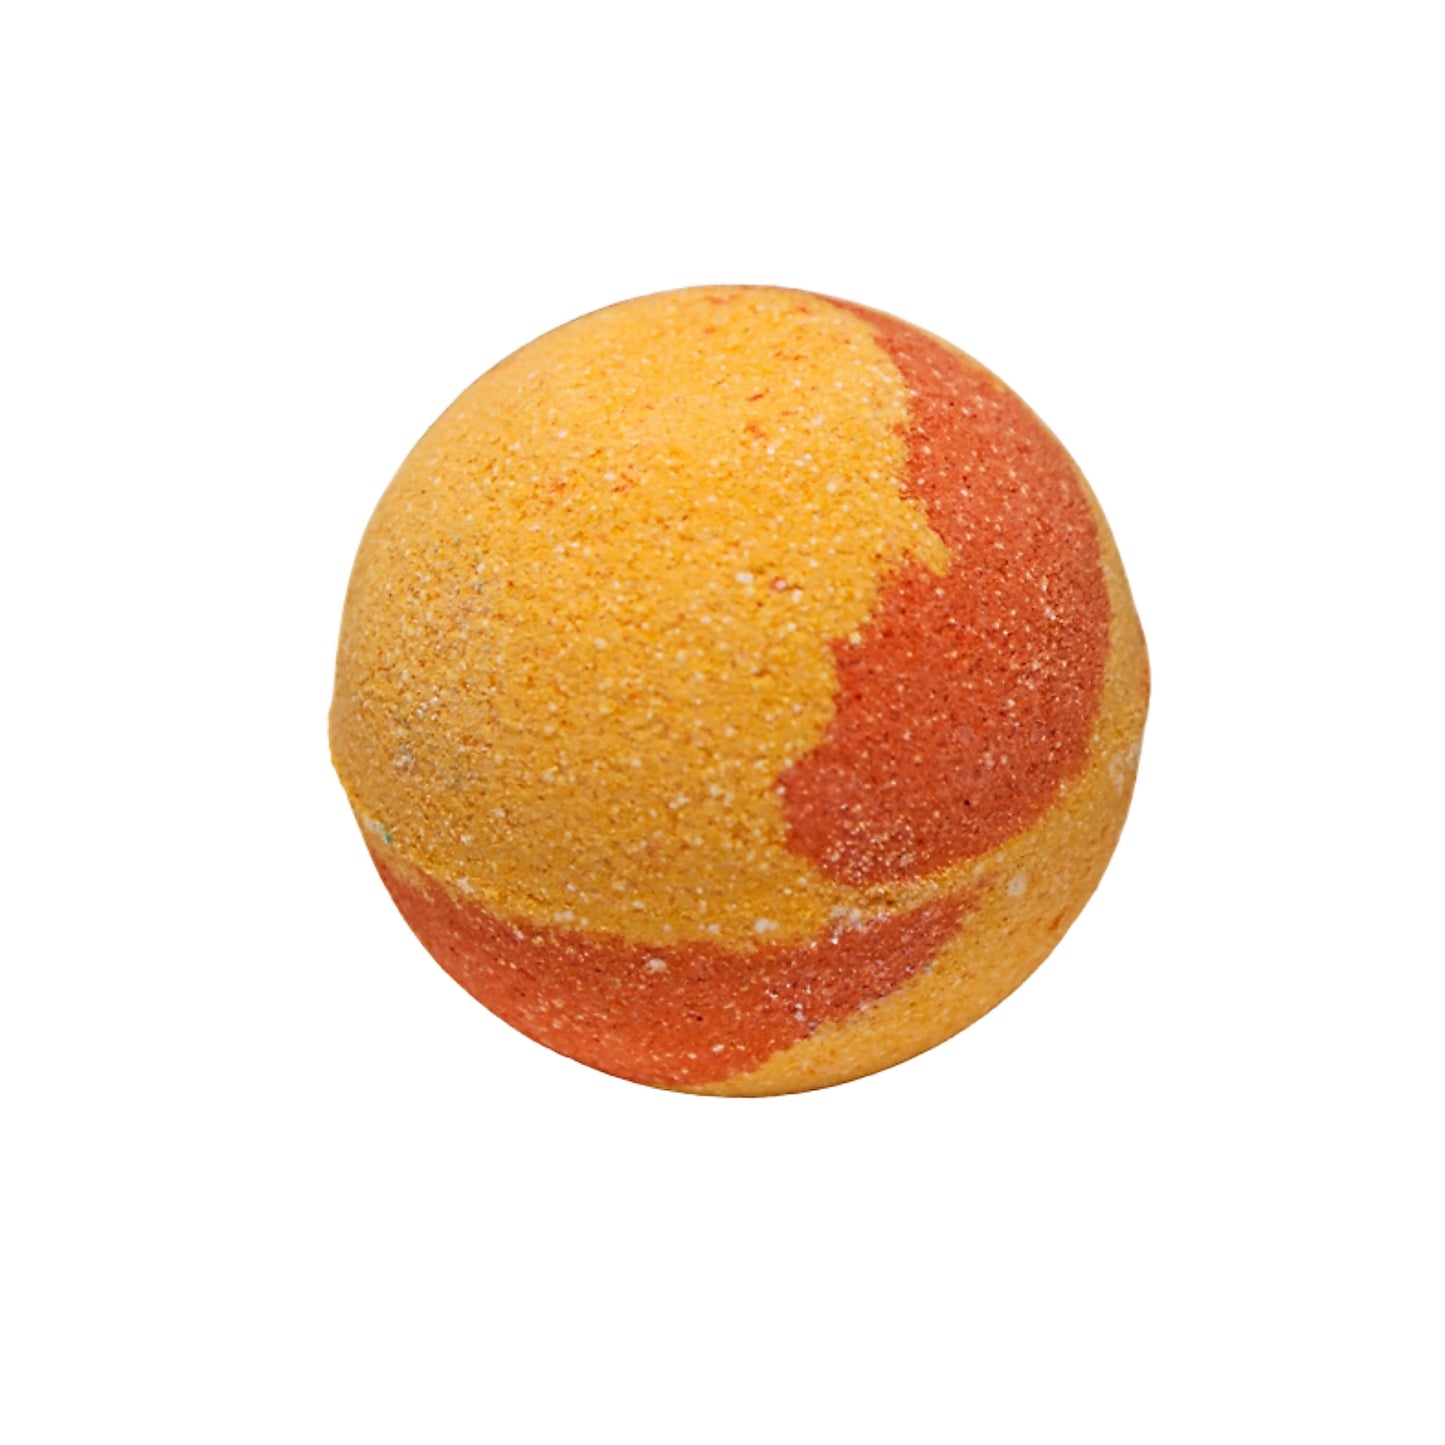 'You're the Bomb' Bath Bomb in Box - Various Colours